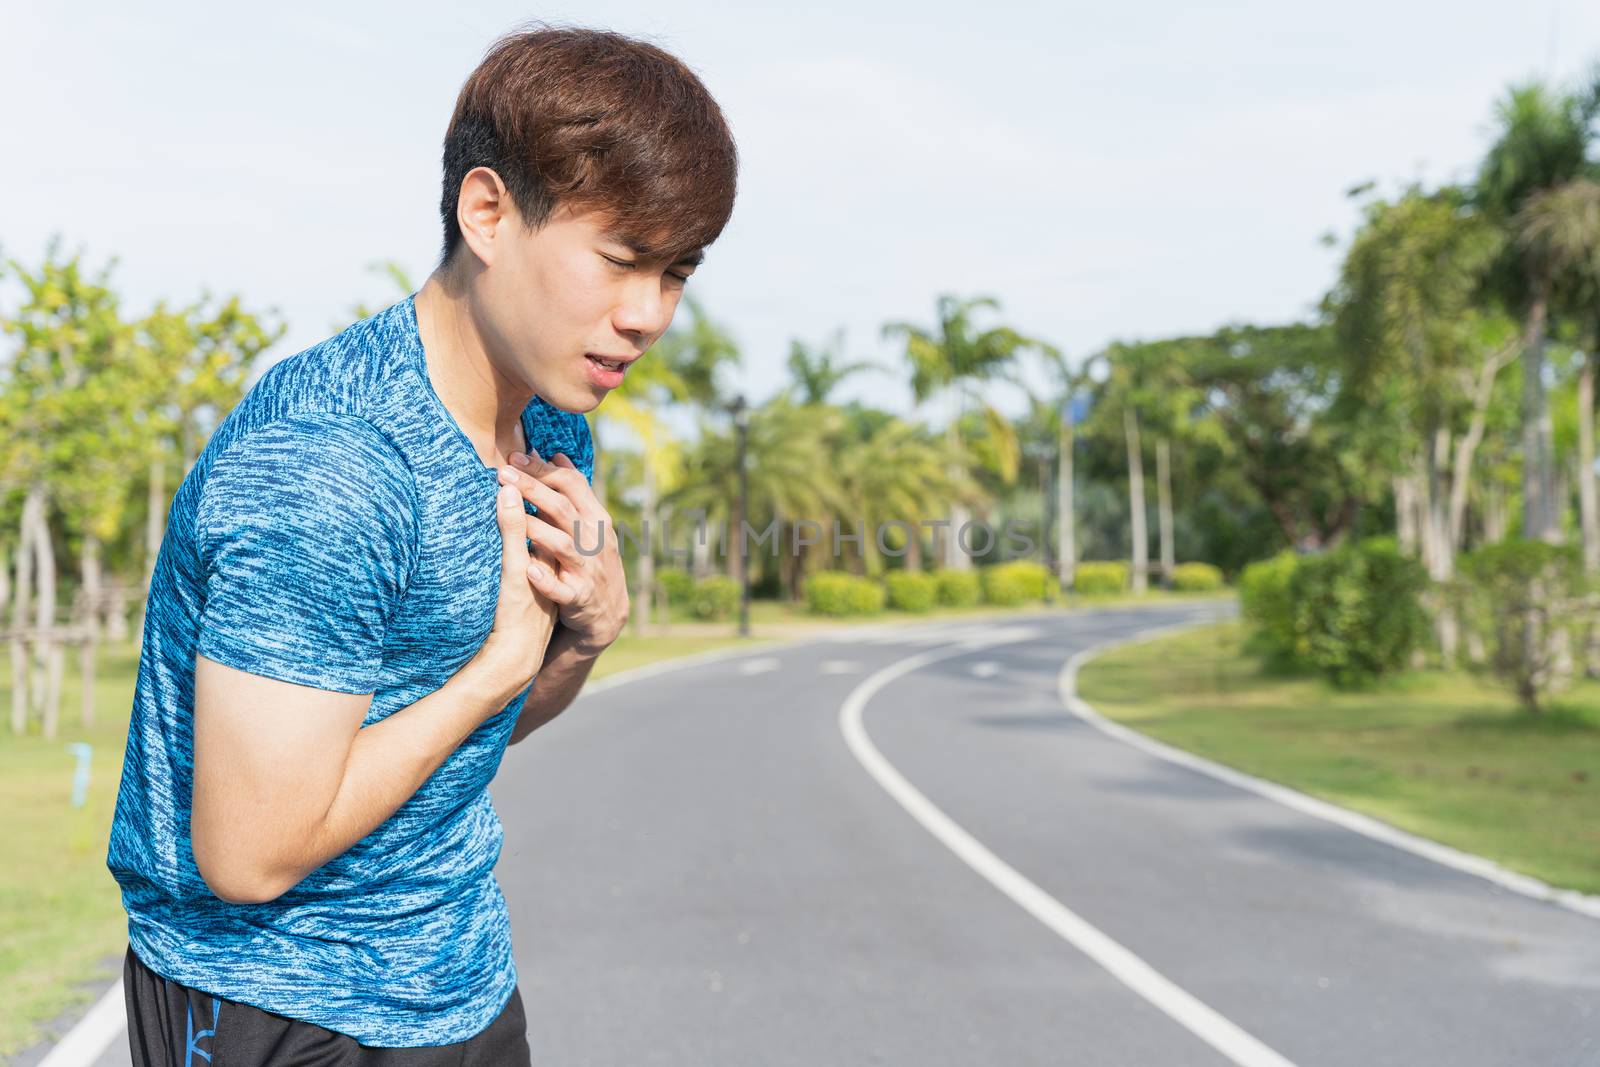 Exhausted male runner suffering painful angina pectoris or asthma breathing problems after running at the park. Sport and healthcare concept.